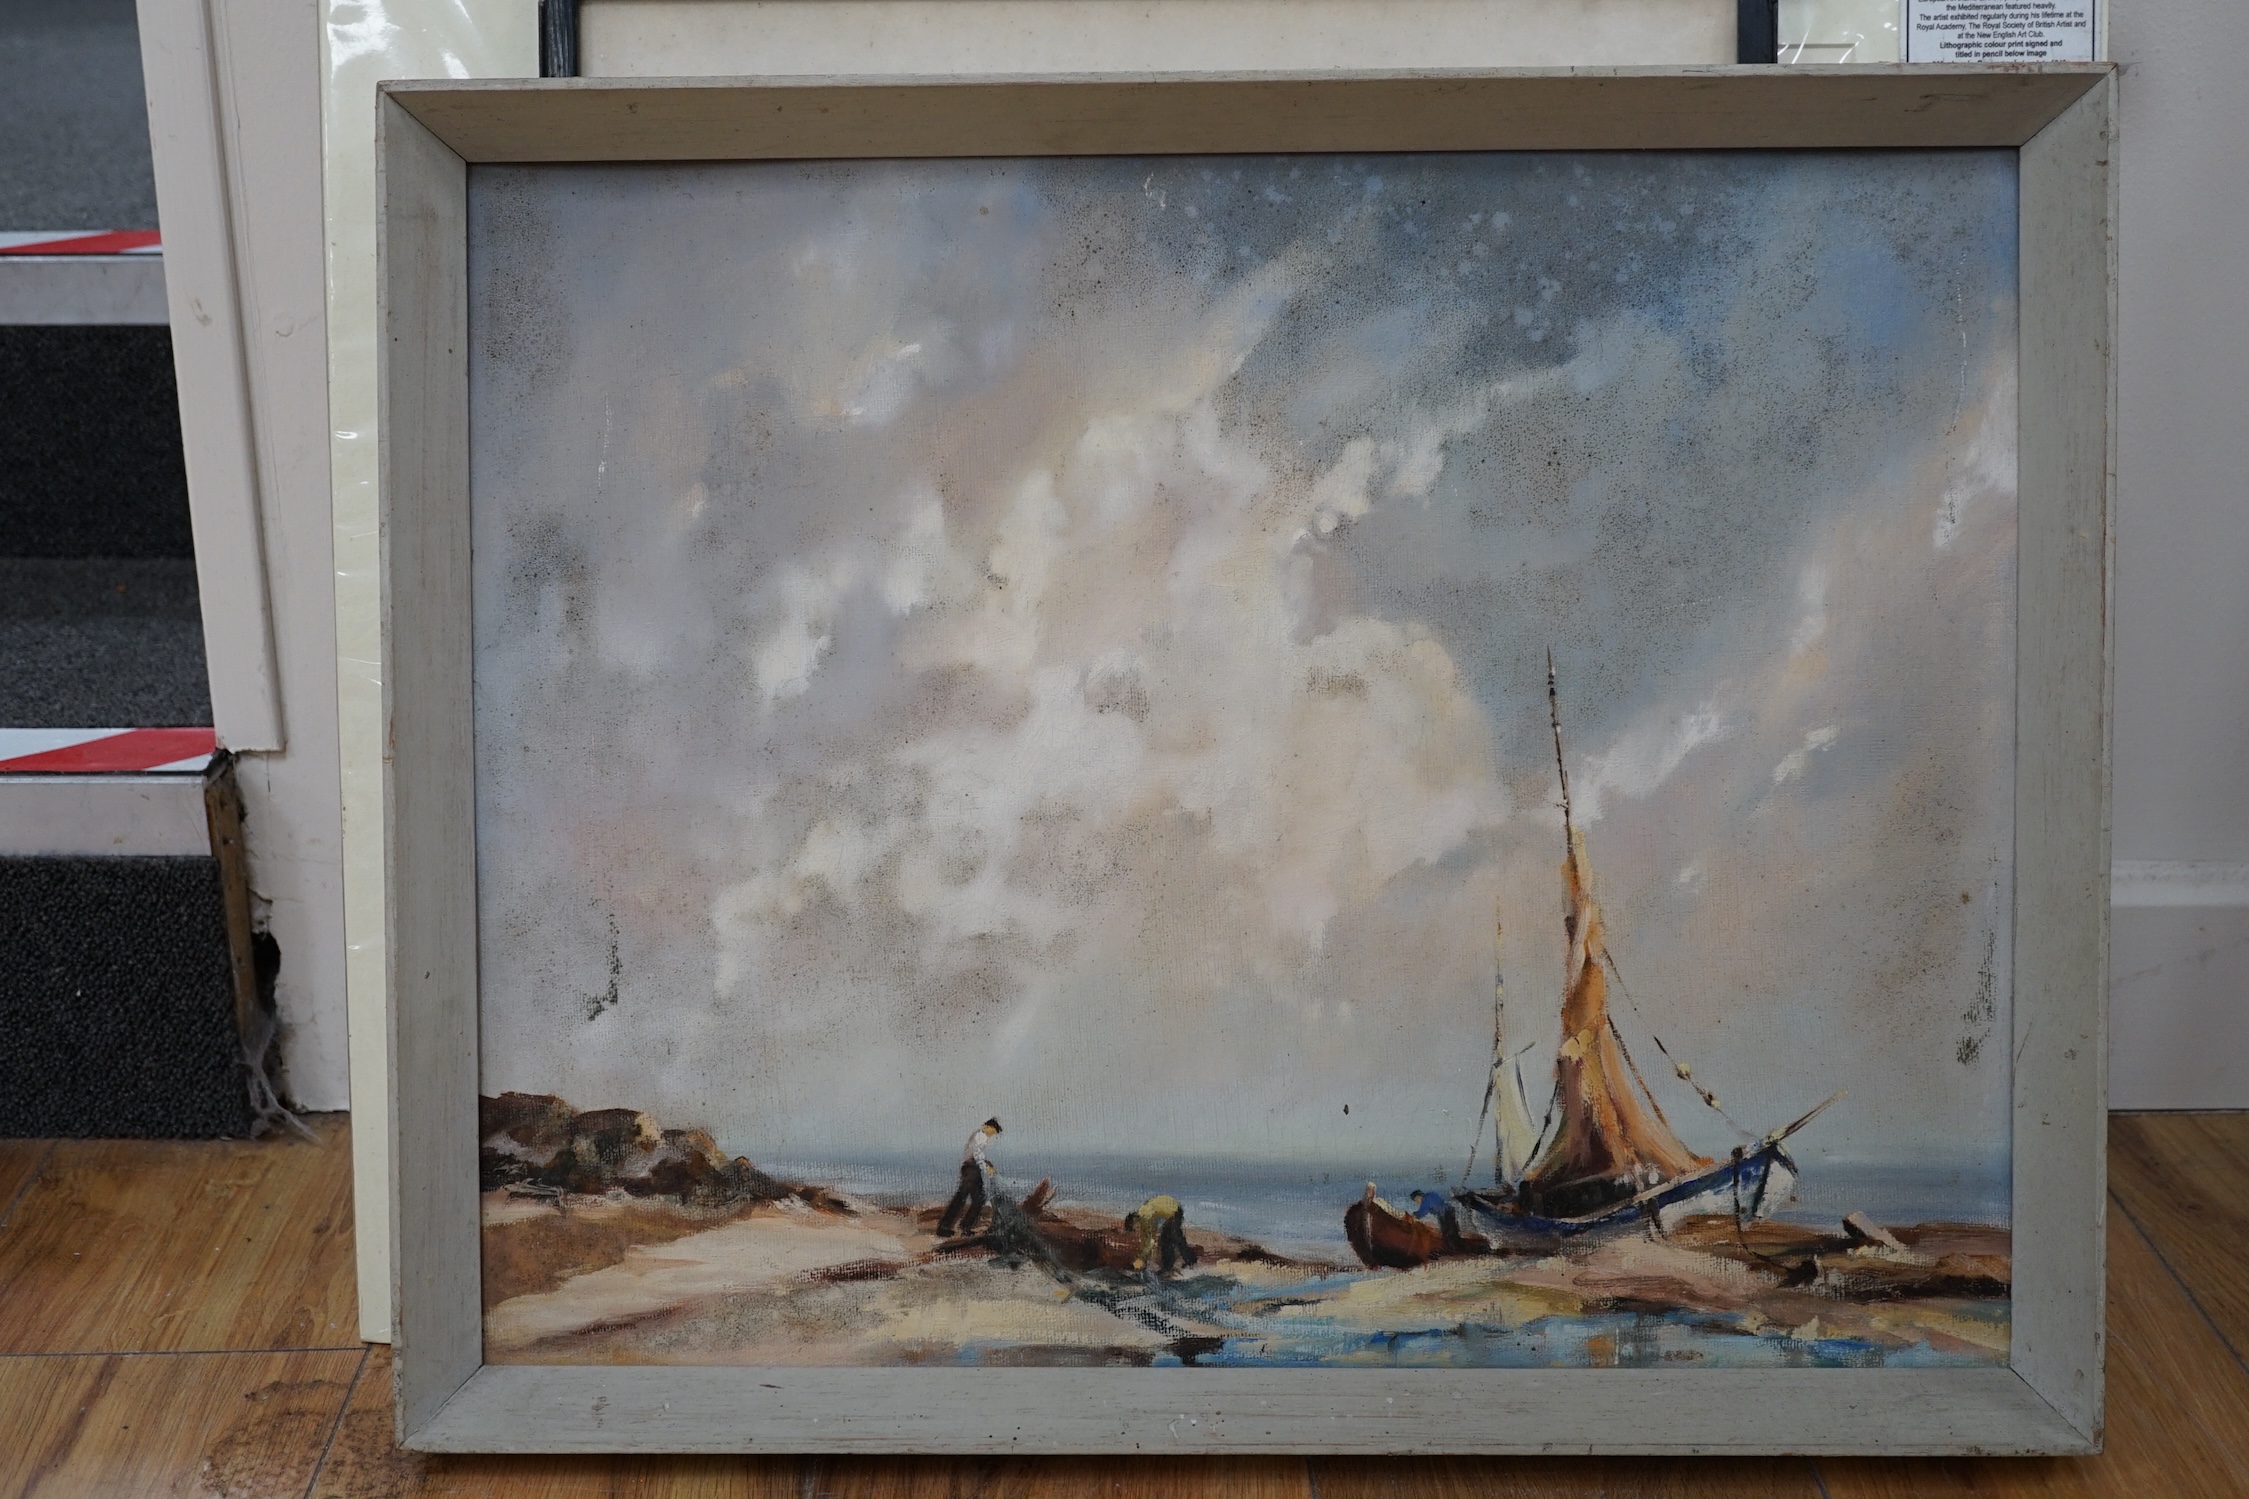 Gudrun Barbara Sibbons (1925-), oil on board, 'Drying nets, mouth of Avon, Christchurch, Hants', inscribed verso and dated 1955, 39 x 49cm. Condition - poor to fair